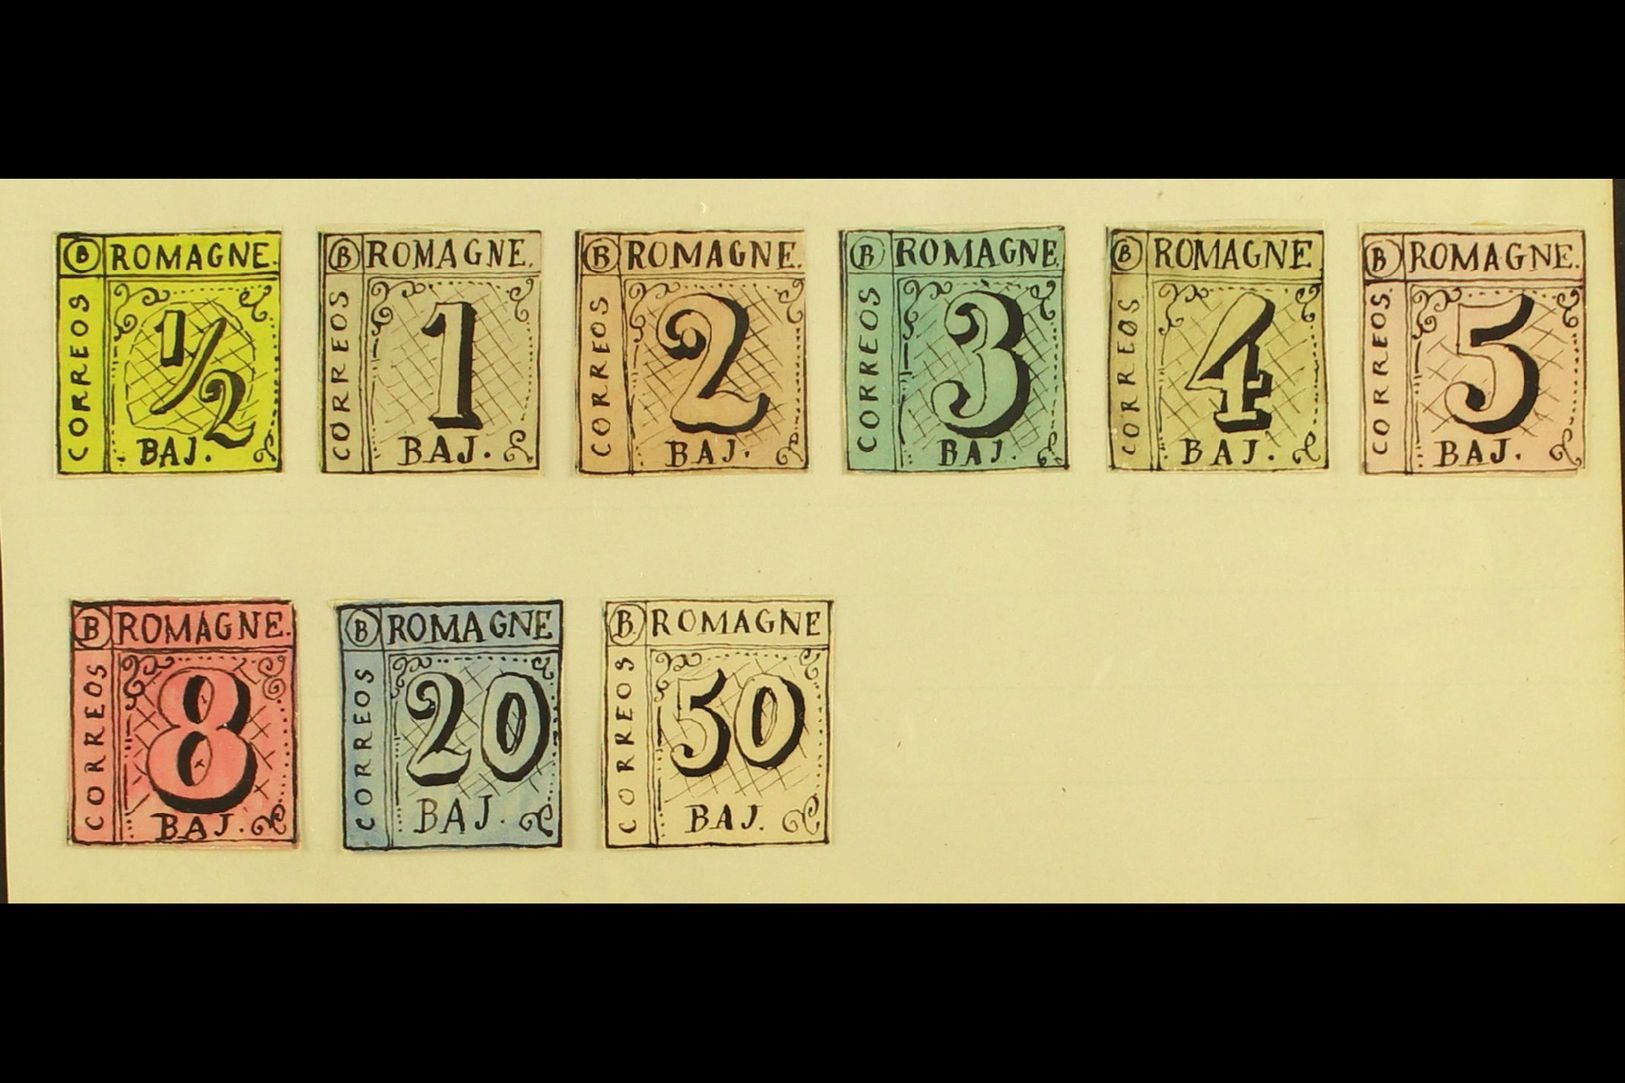 1861 HAND PAINTED STAMPS Unique Miniature Artworks Created By A French "Timbrophile" In 1861. ROMAGNA Nine Different Val - Non Classés